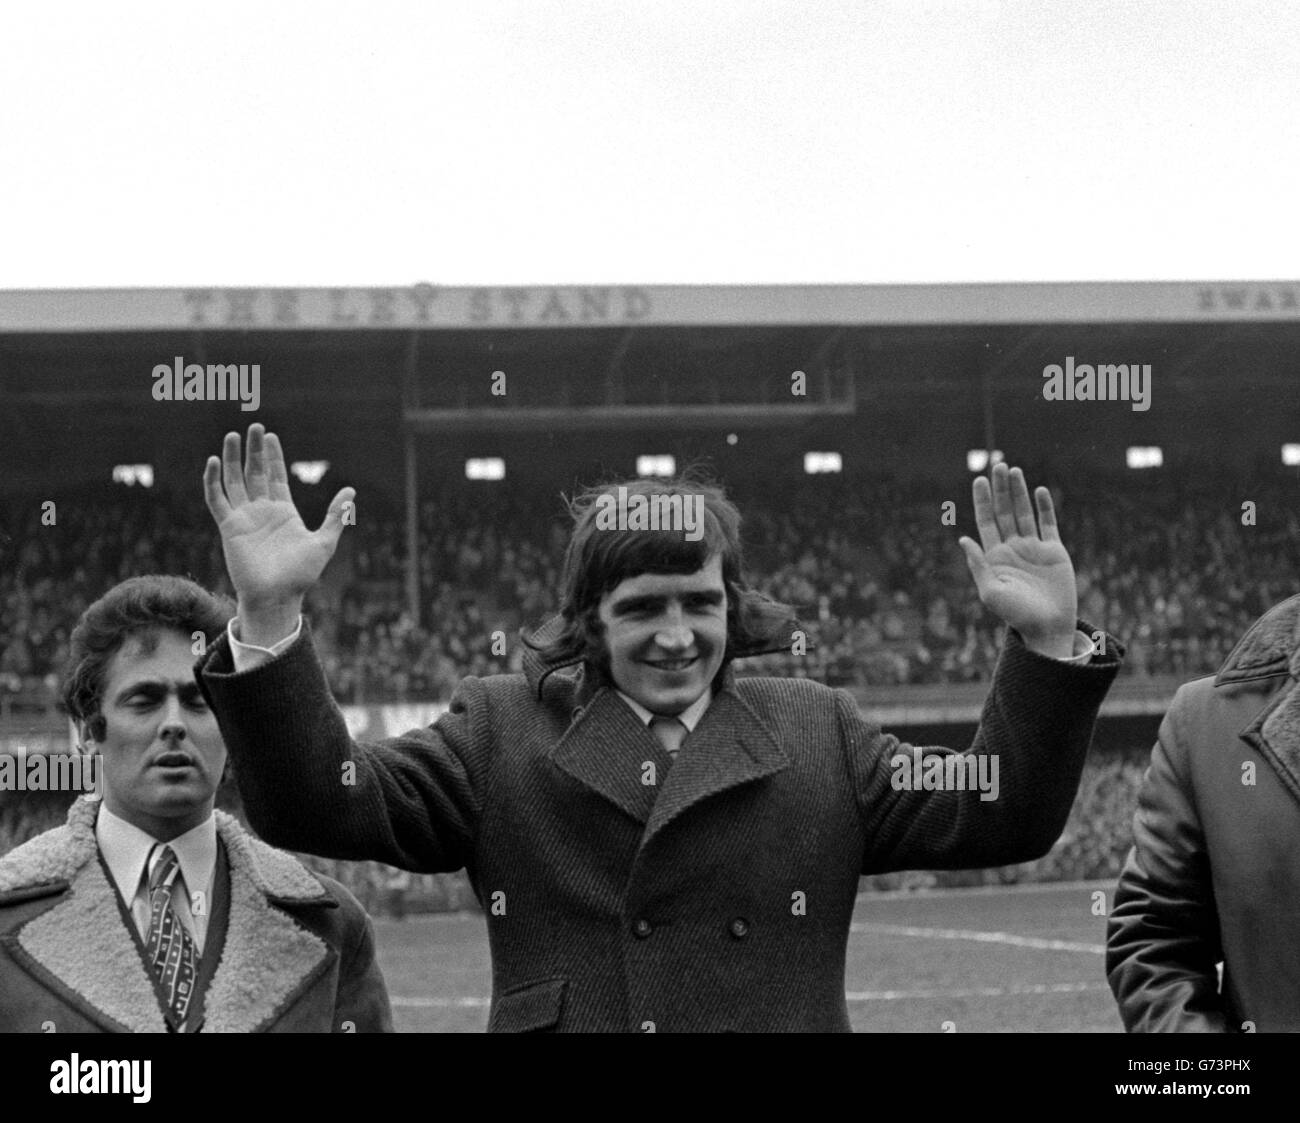 Ian Moore the Nottingham Forest forward now at the centre of a 225,000 transfer row, acknowledges the welcome as he is introduced to the crowd at the Baseball Ground in Derby, where Derby County - the club to which he thought he was being transferred - were meeting Wolves in a First Division match. Notthingham Forest's Committee declined to assent to Moore's move to Derby, for whom he signed a form. Stock Photo